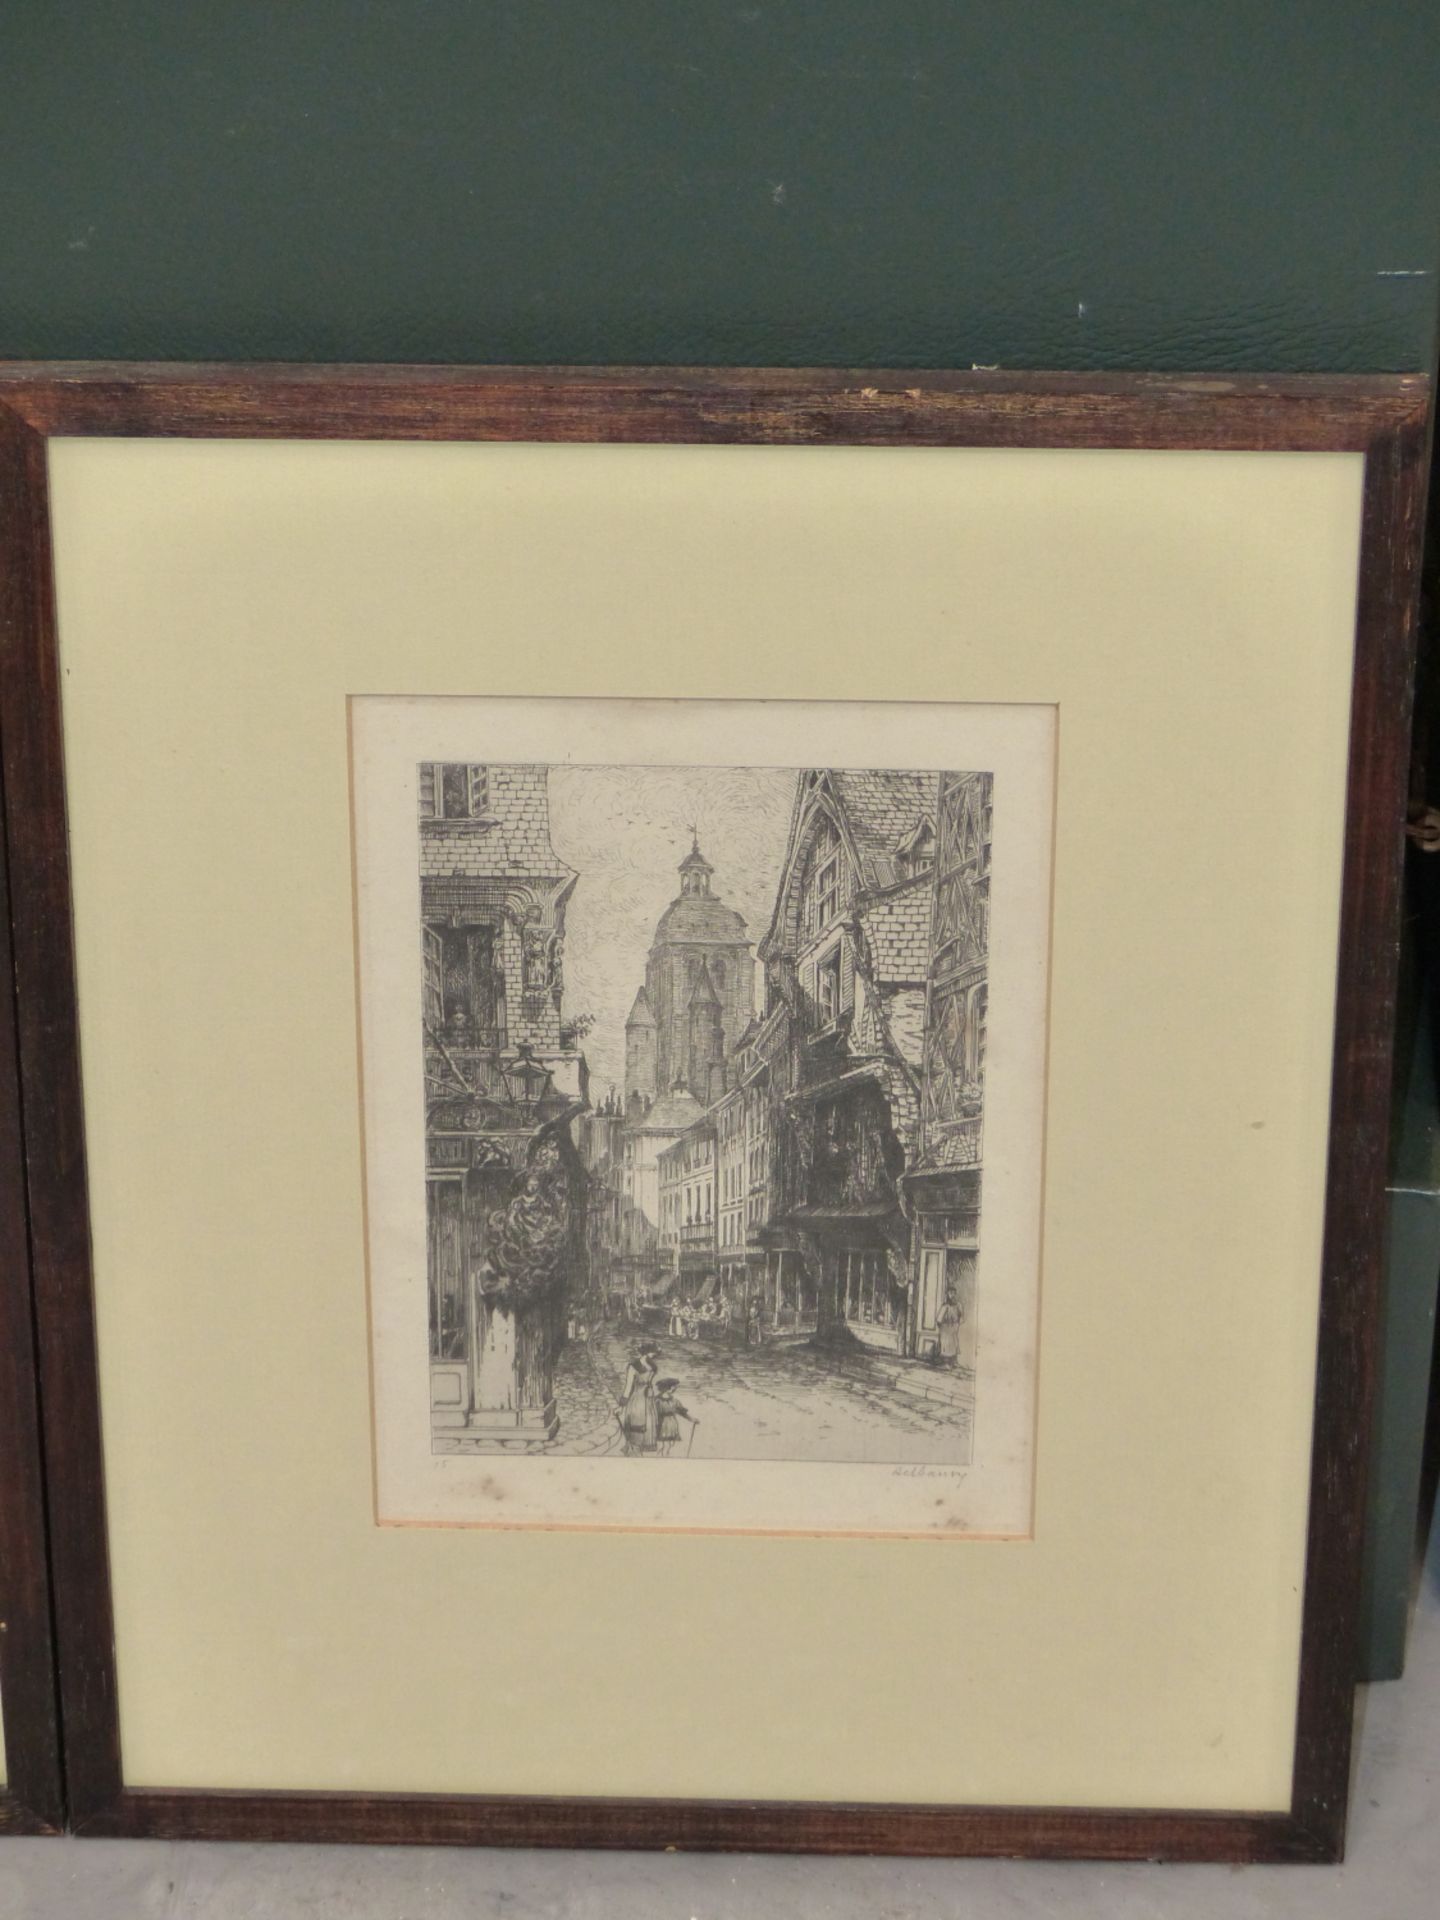 ** LAIDLAW? (EARLY 20TH CENTURY) TOWER BRIDGE LONDON & PICCADILLY CIRCUS. ETCHINGS. PENCIL SIGNED - Image 7 of 8